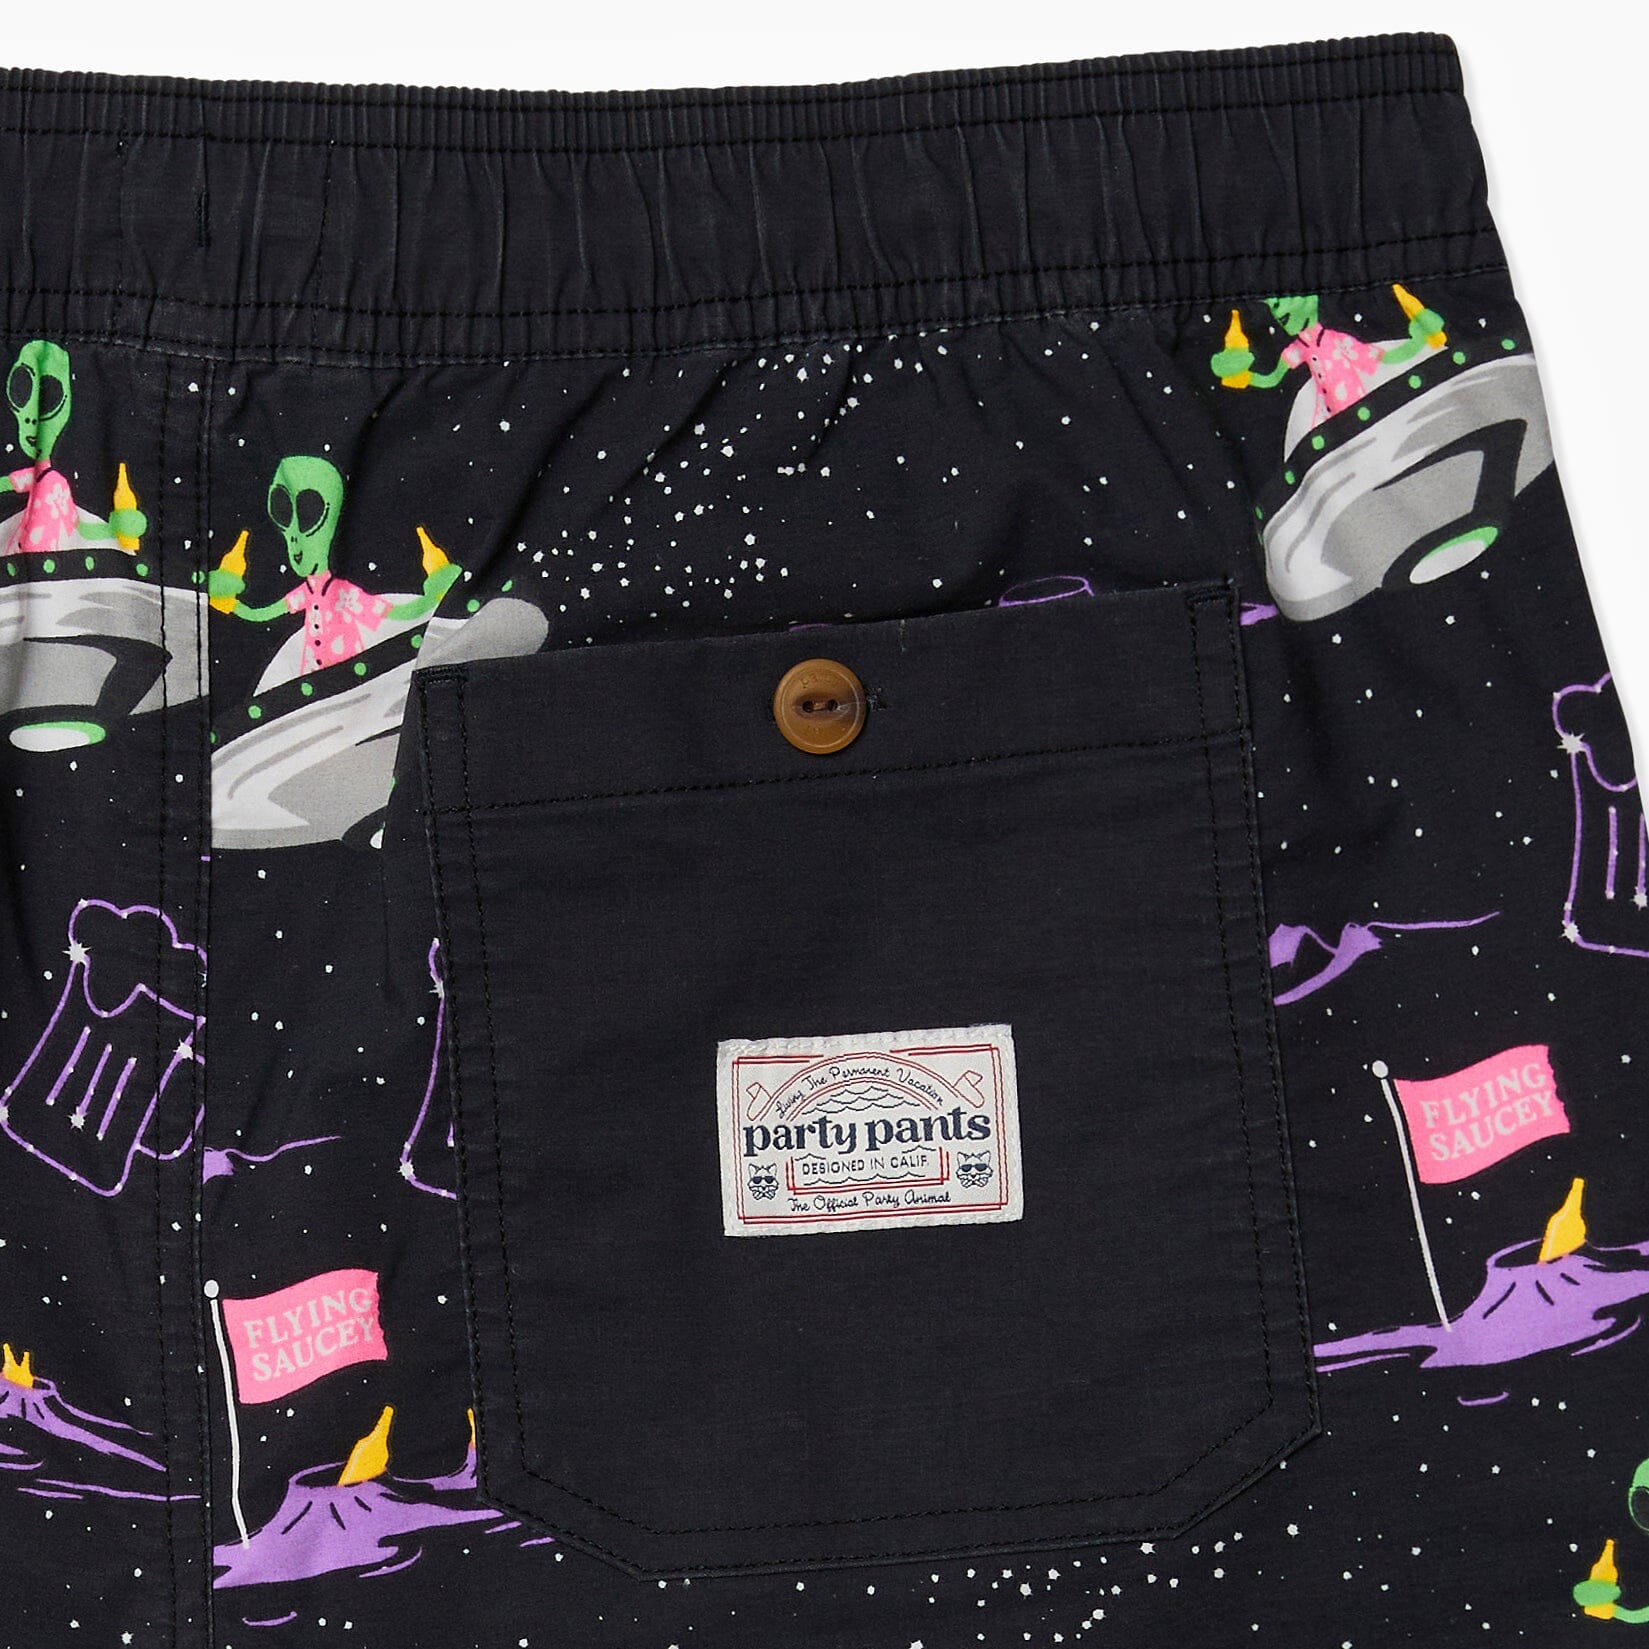 FLYING SAUCEY PARTY STARTER SHORT - BLACK PRINTED SHORTS PARTY PANTS 